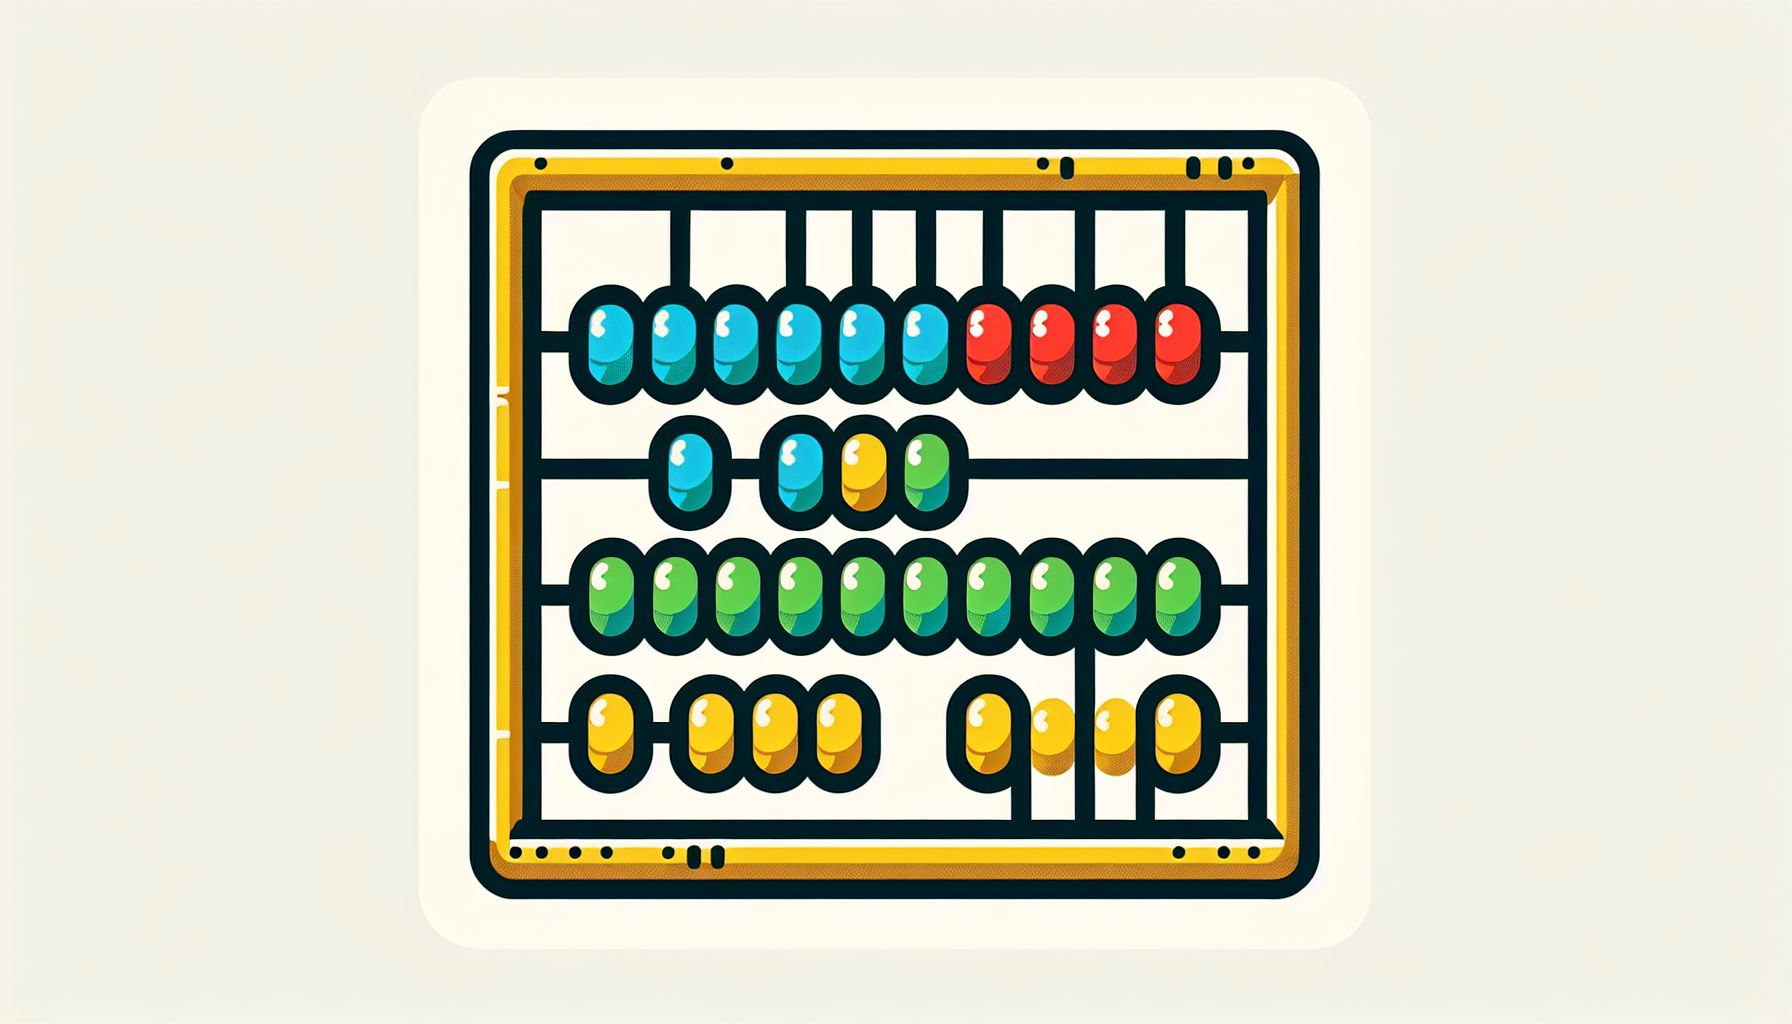 Abacus in flat illustration style and white background, red #f47574, green #88c7a8, yellow #fcc44b, and blue #645bc8 colors.